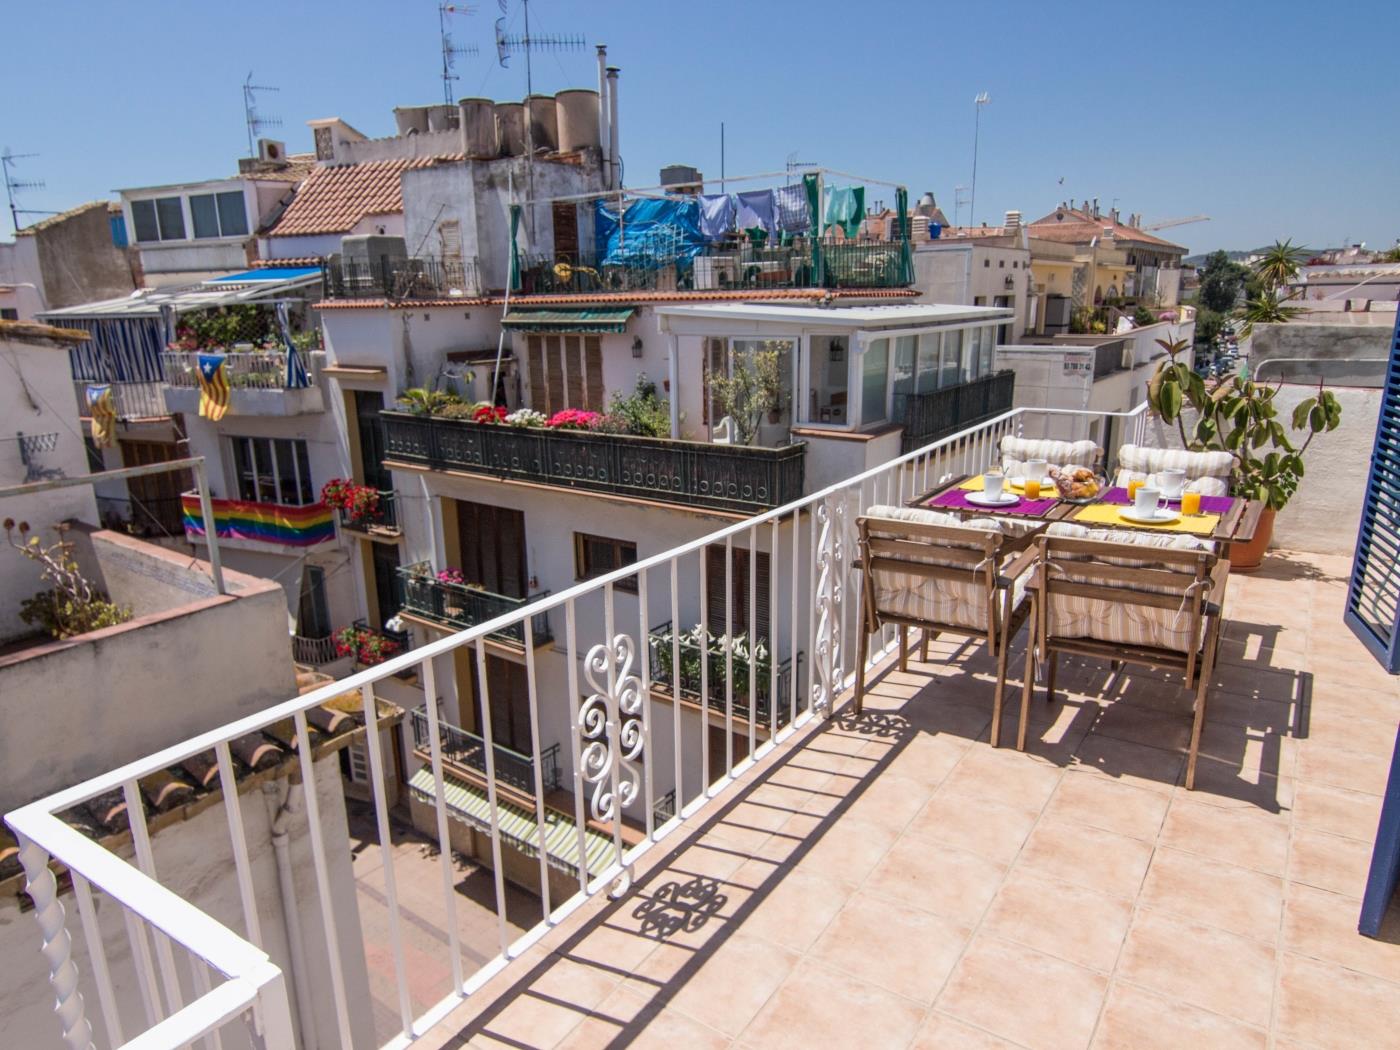 PURPLE ATTIC BY BLAUSITGES Penthouse with terrace, AC and WIFI in Sitges. in SITGES